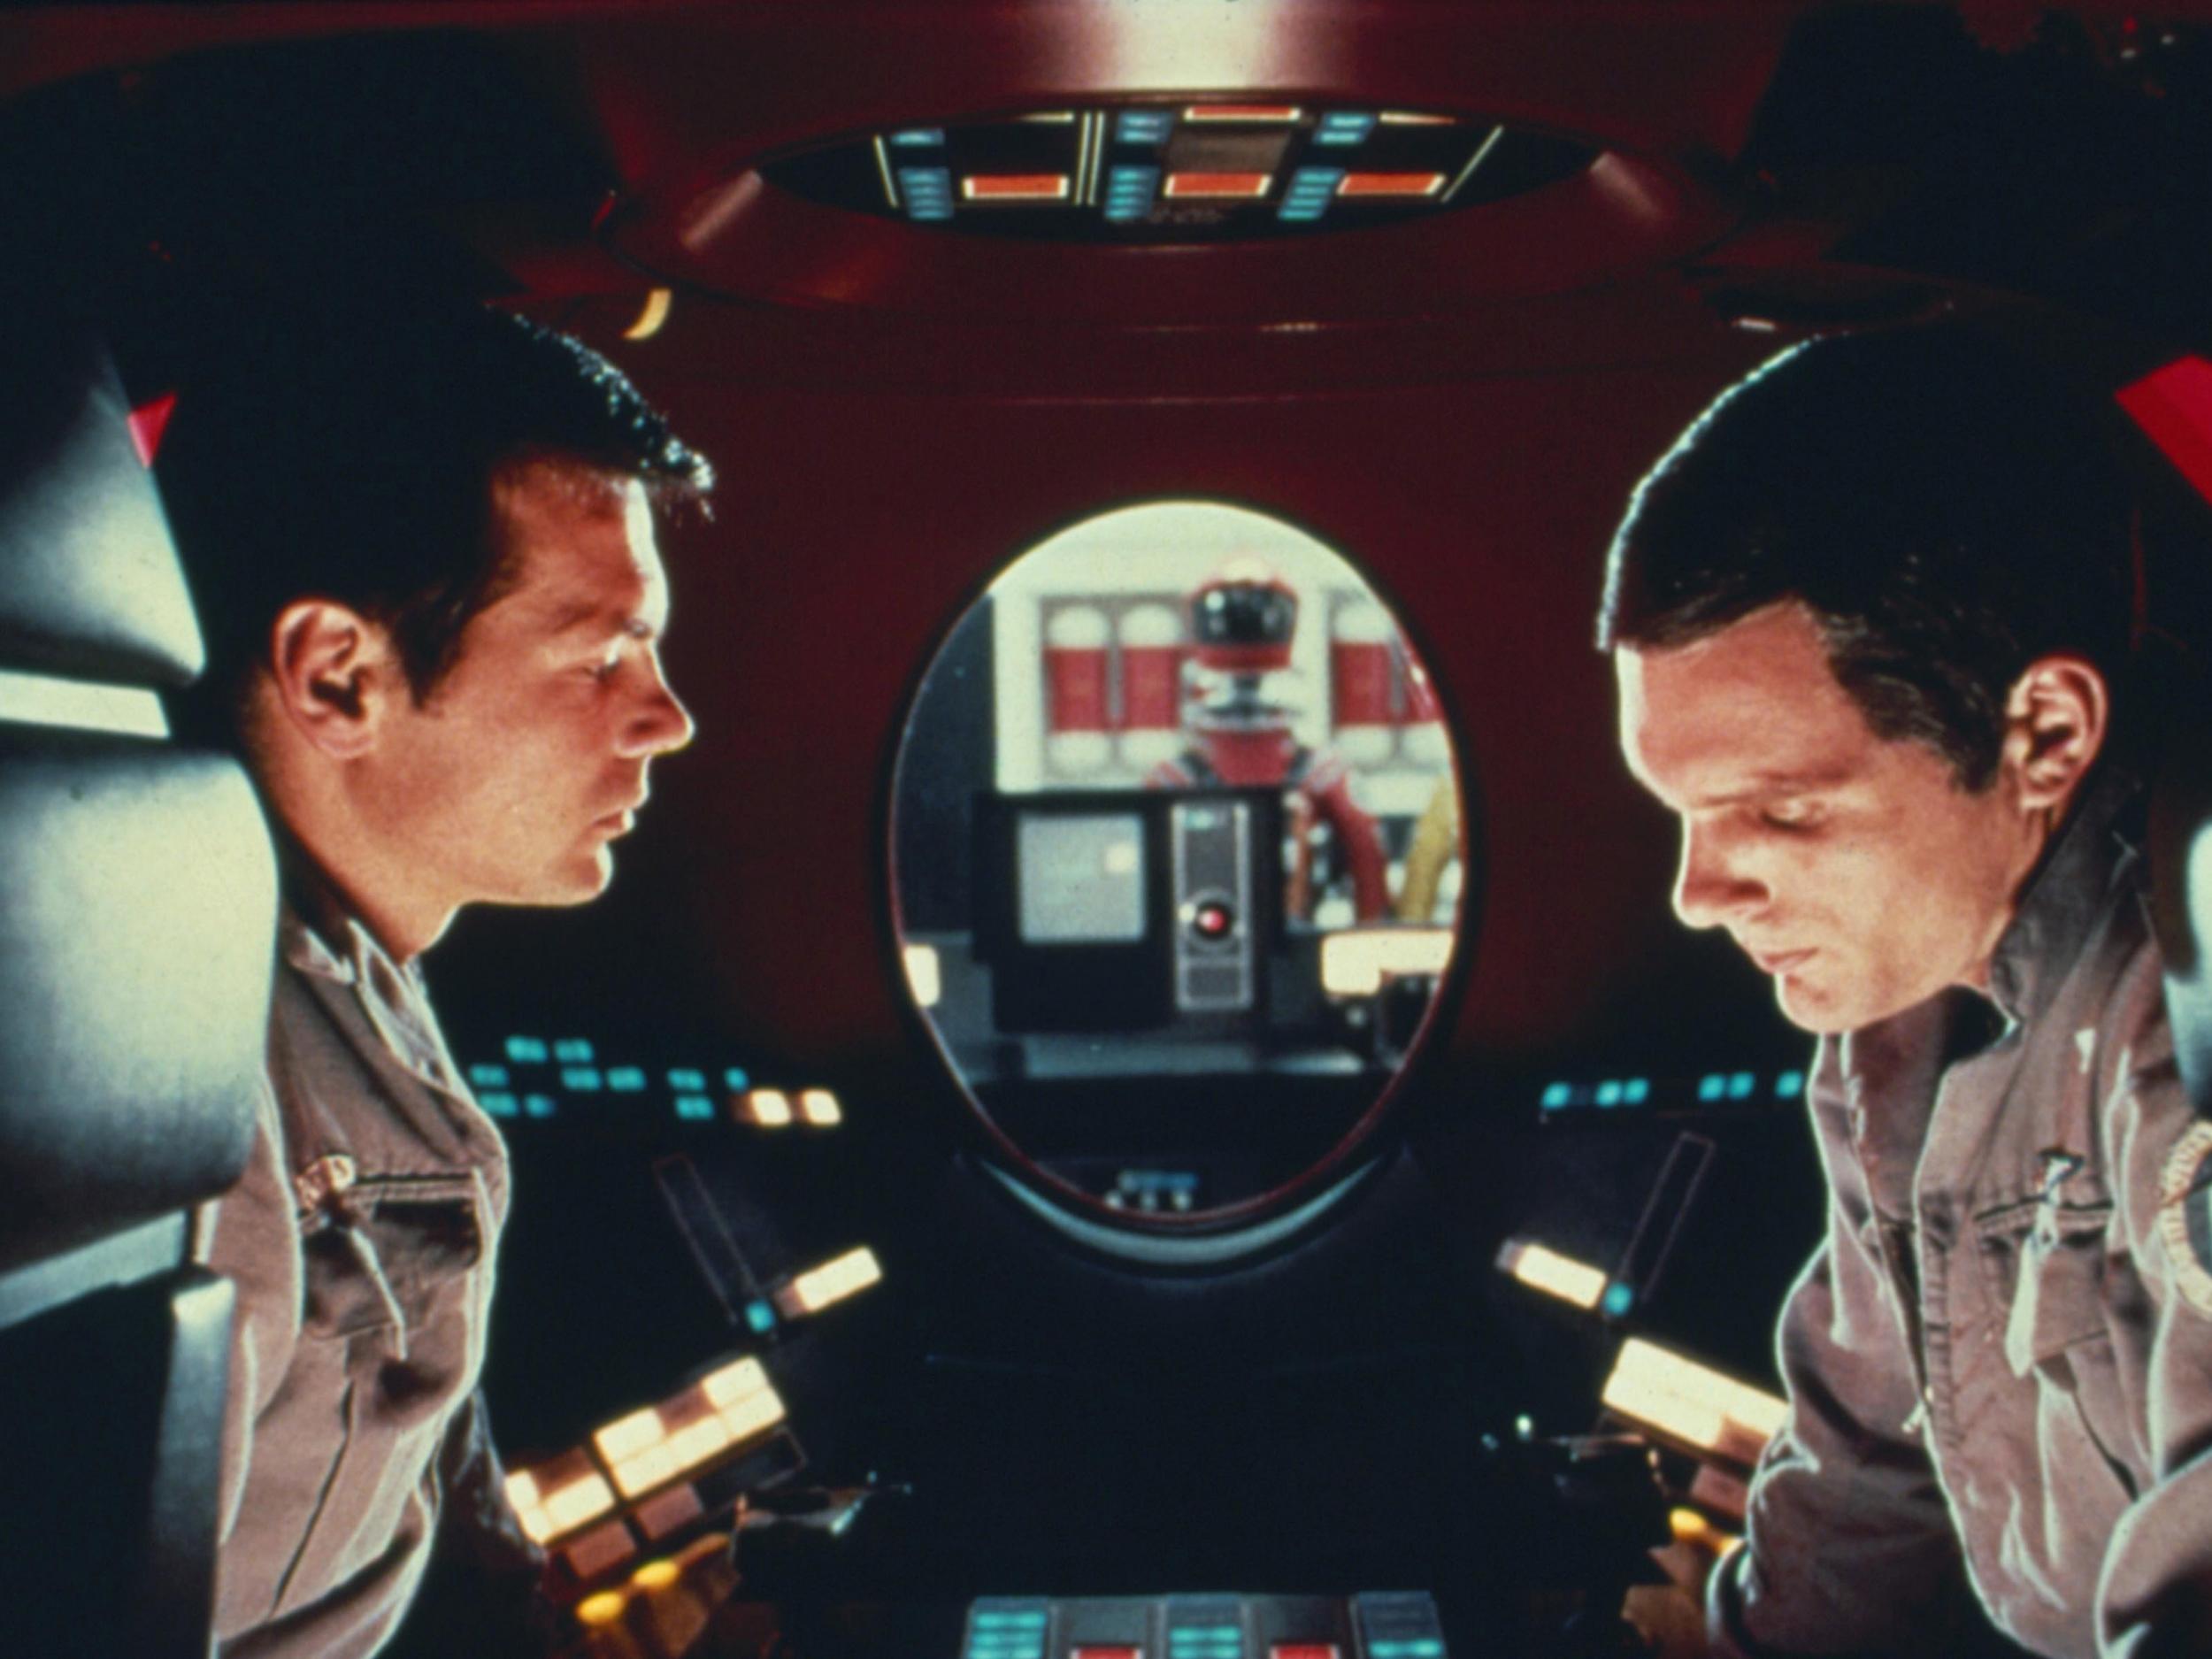 Like 'Blade Runner 2049', the film '2001: A Space Odyssey' (Kubrick) is more science-philosophy then science fiction Rex)